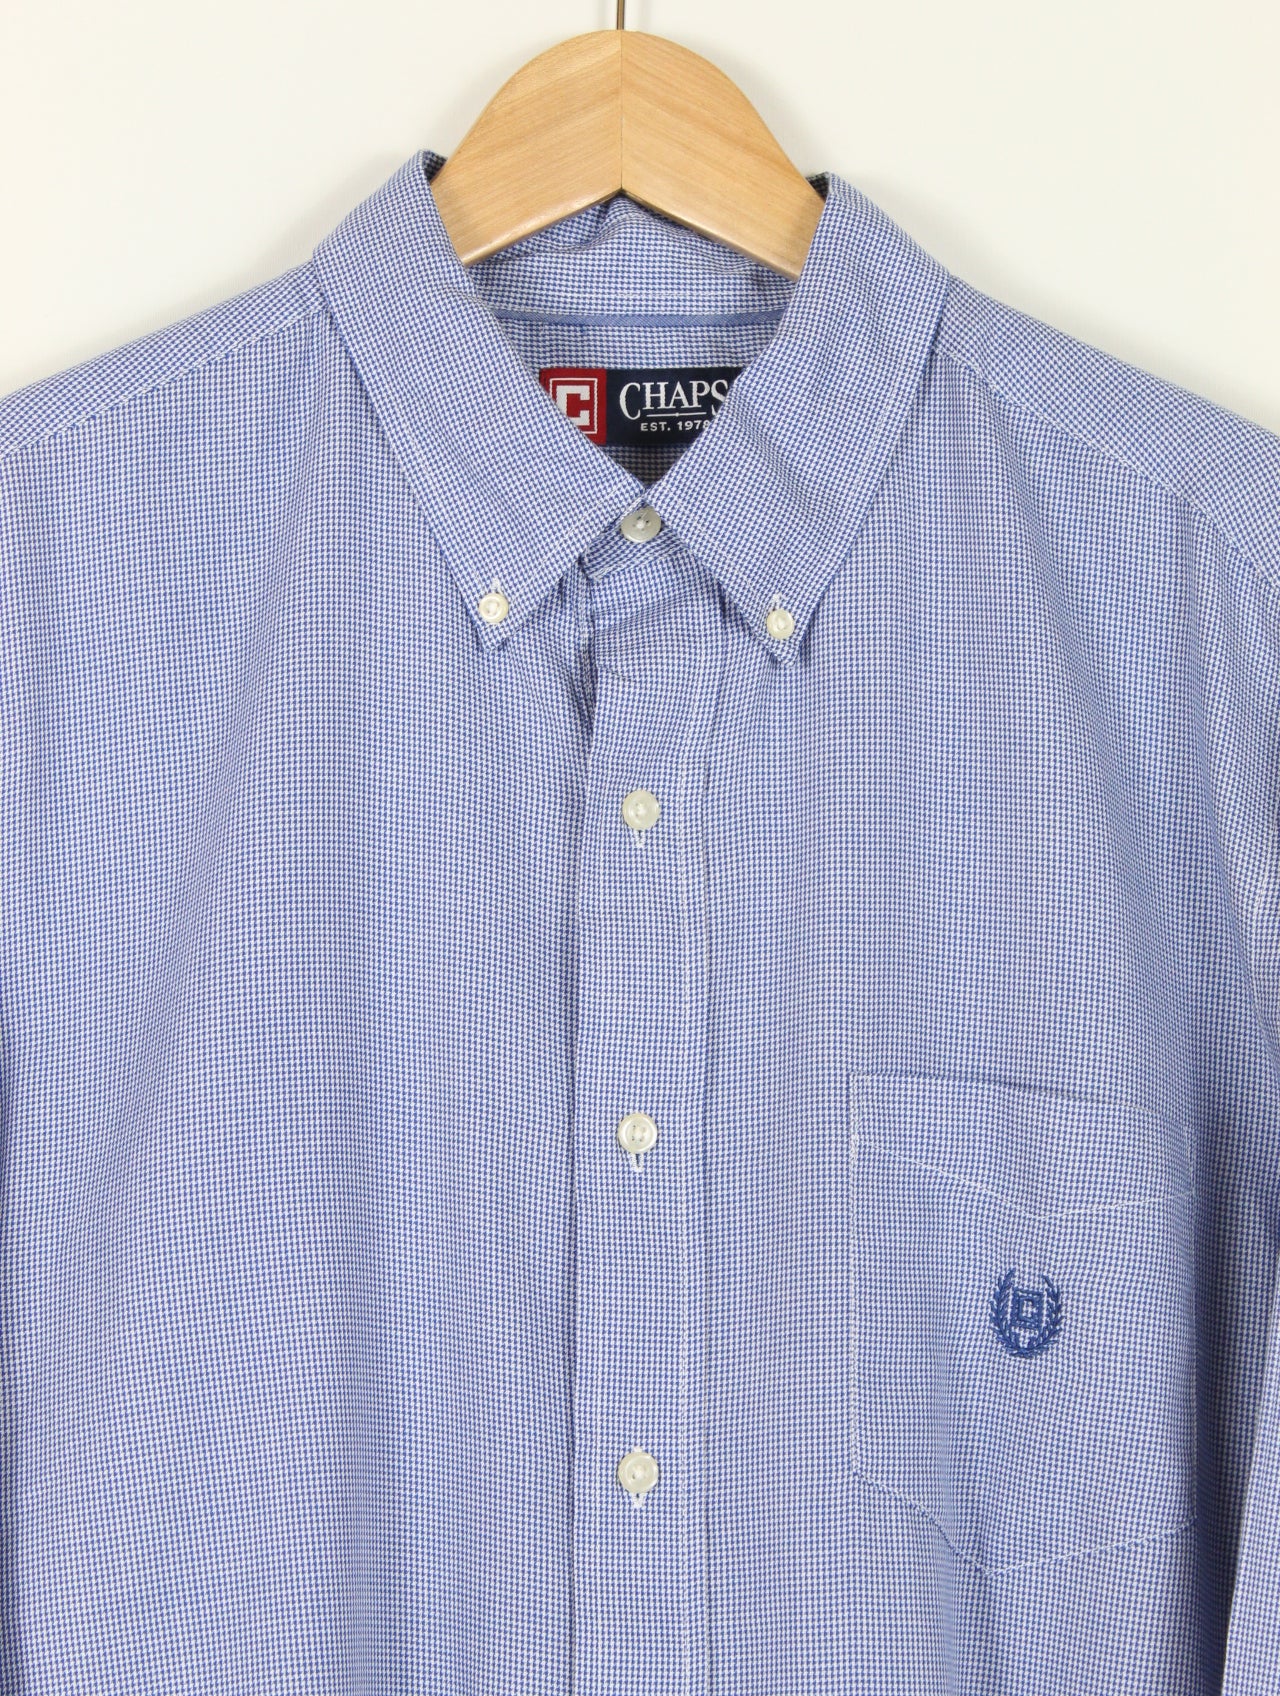 Blue Chaps Houndstooth Shirt (L)